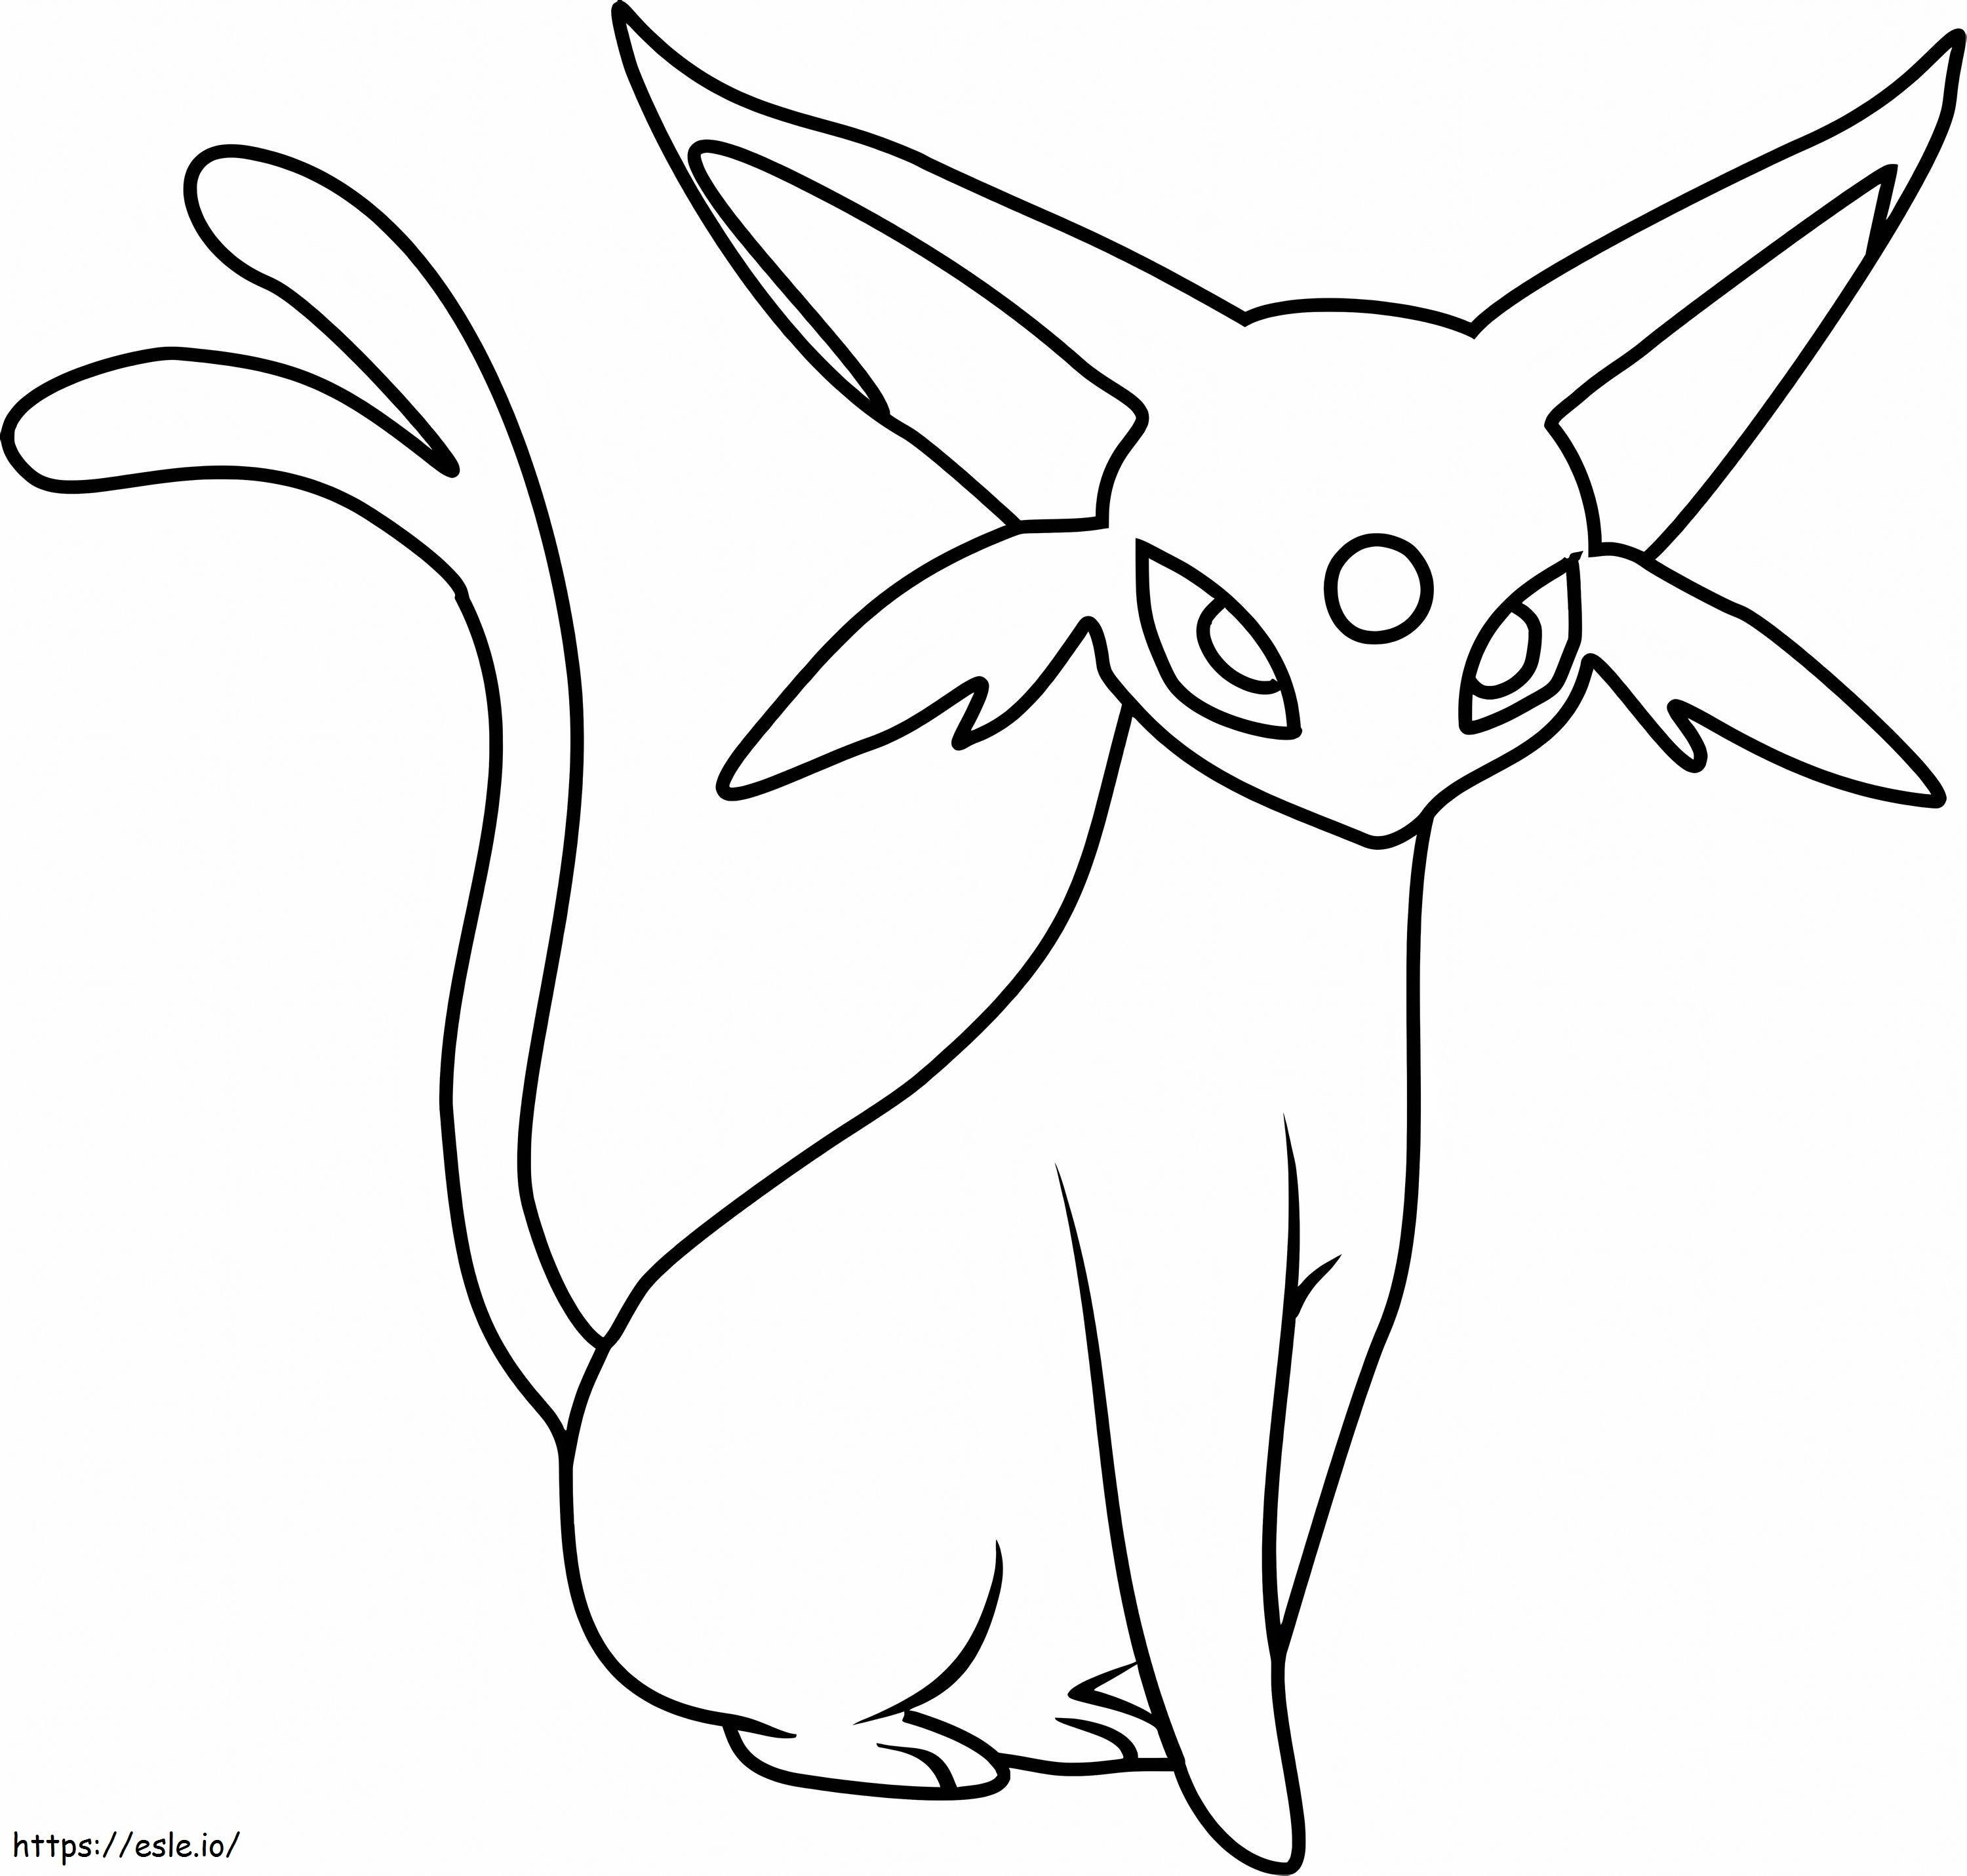 Espeon In Pokemon coloring page